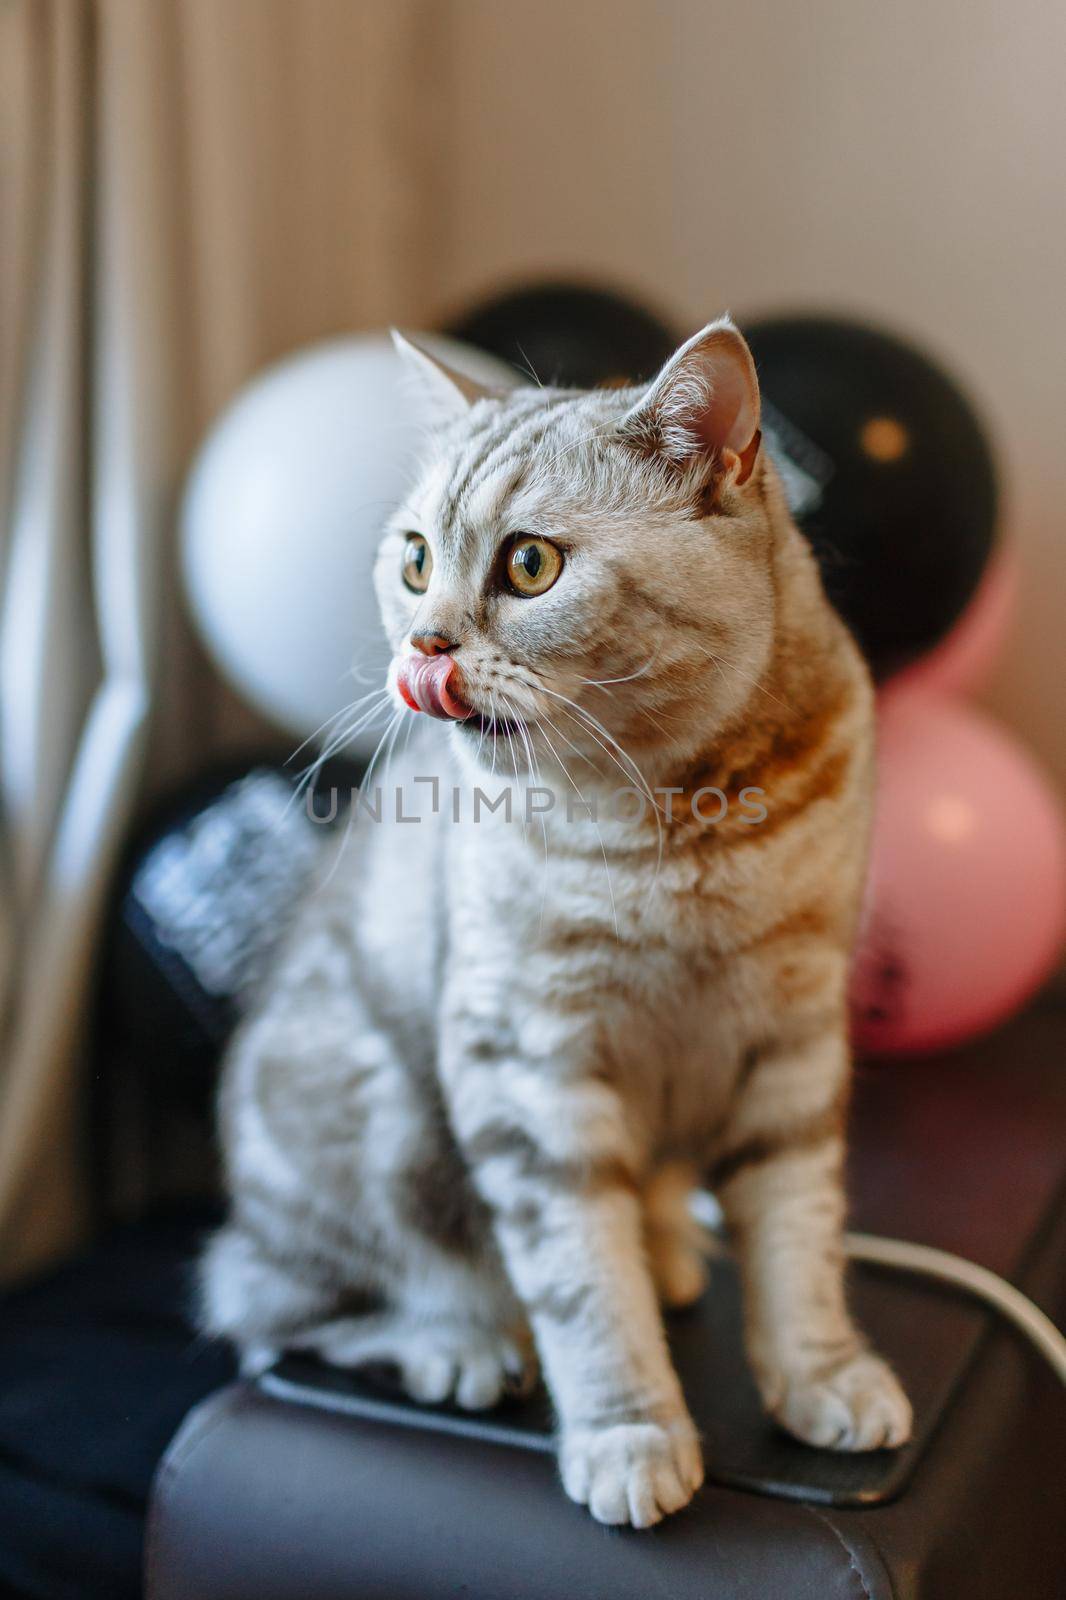 A cat licking its mouth with its tongue against the background of balloons